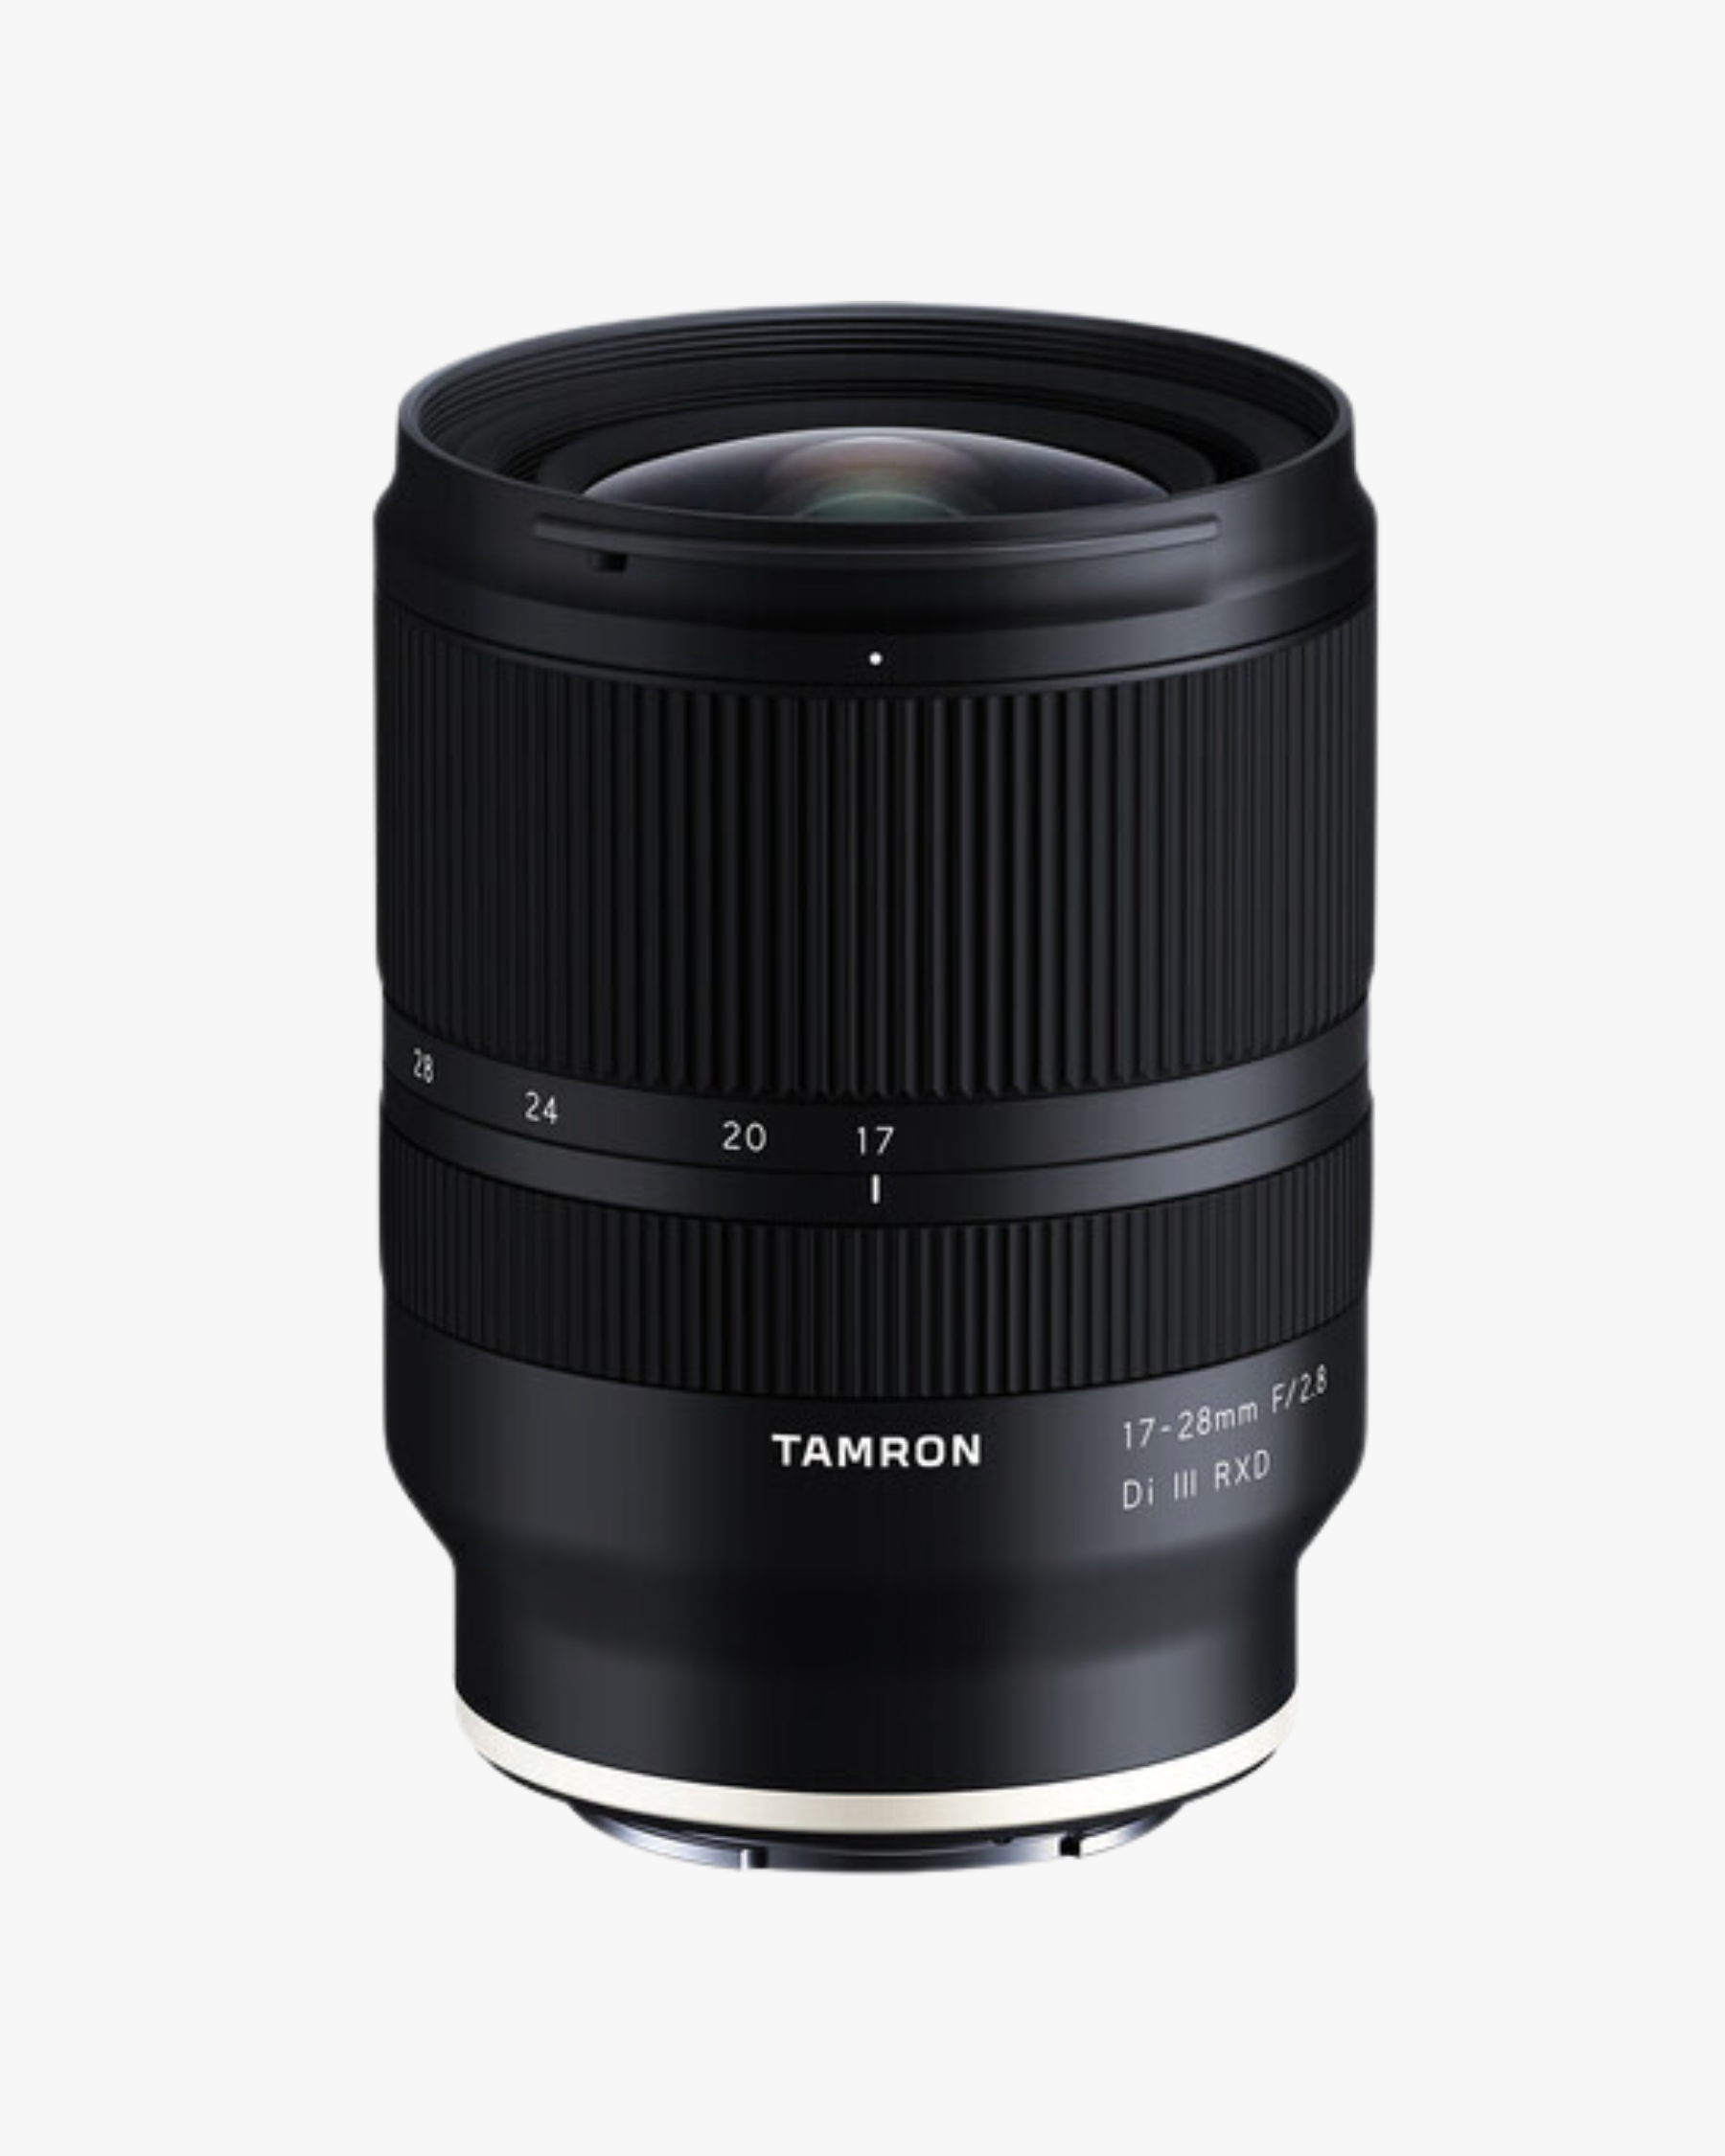 Tamron 17 28mm F2.8 Di III RXD for Sony E